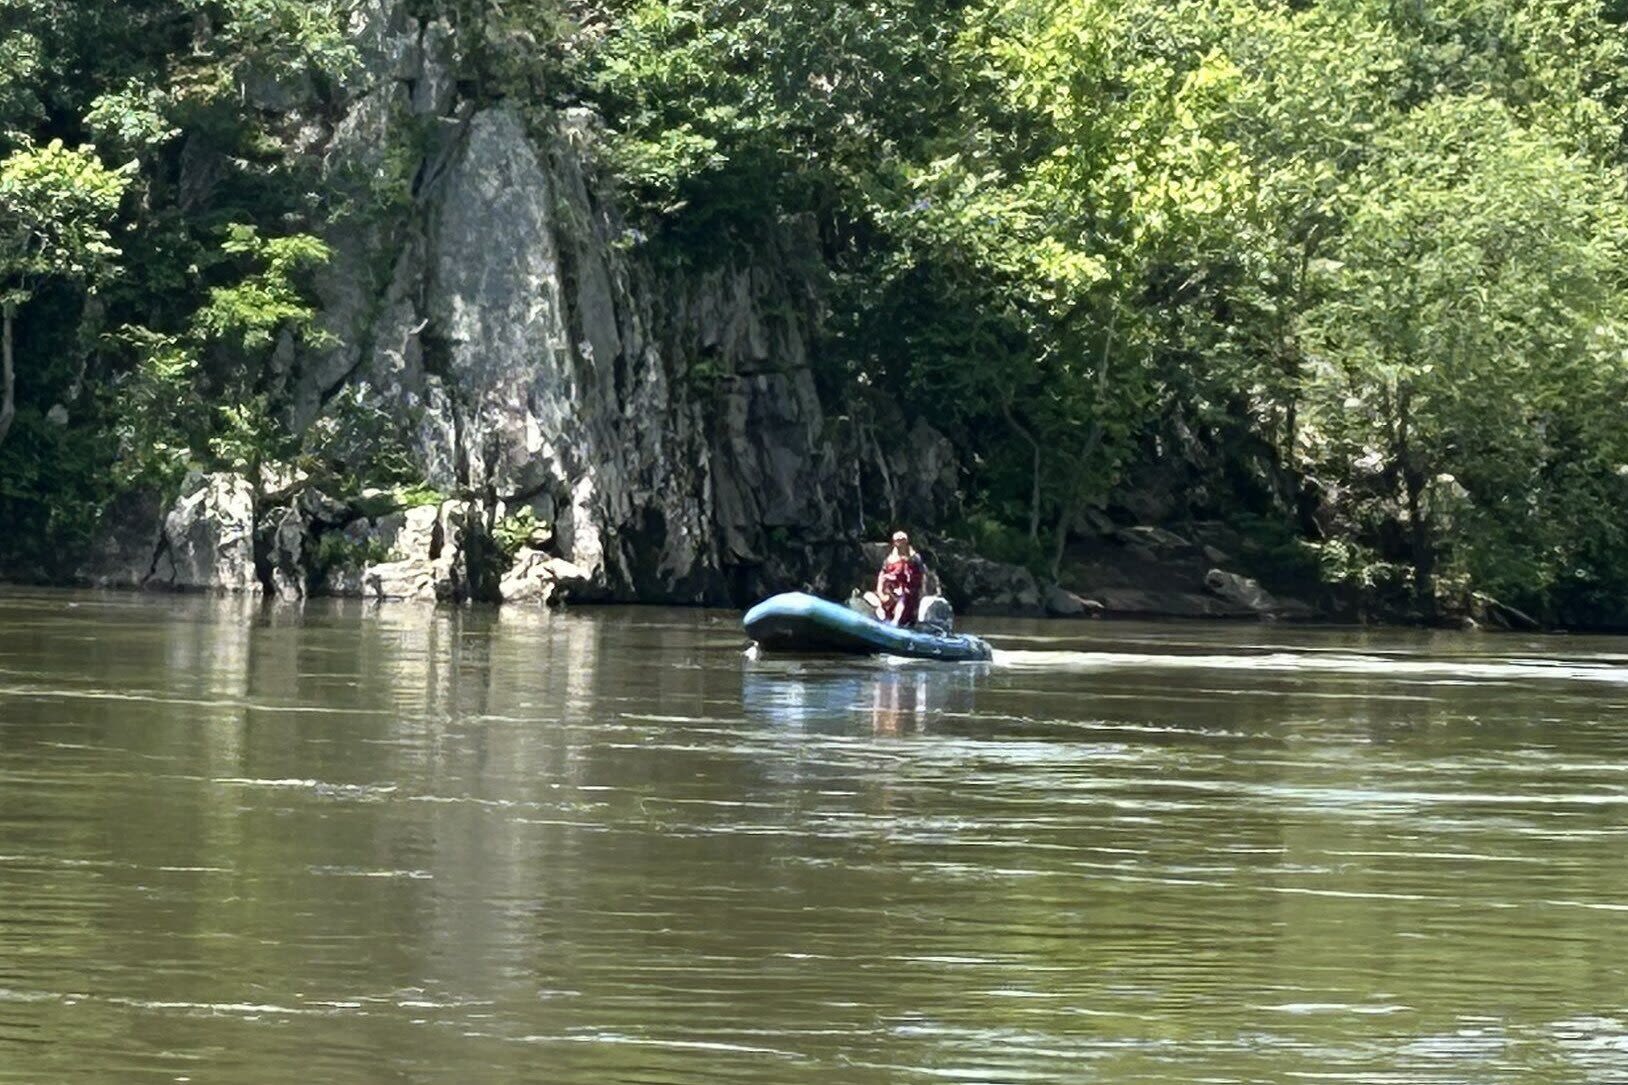 Search continues for missing swimmer near Great Falls; first responders warn public about ‘dangers’ of Potomac River currents - WTOP News